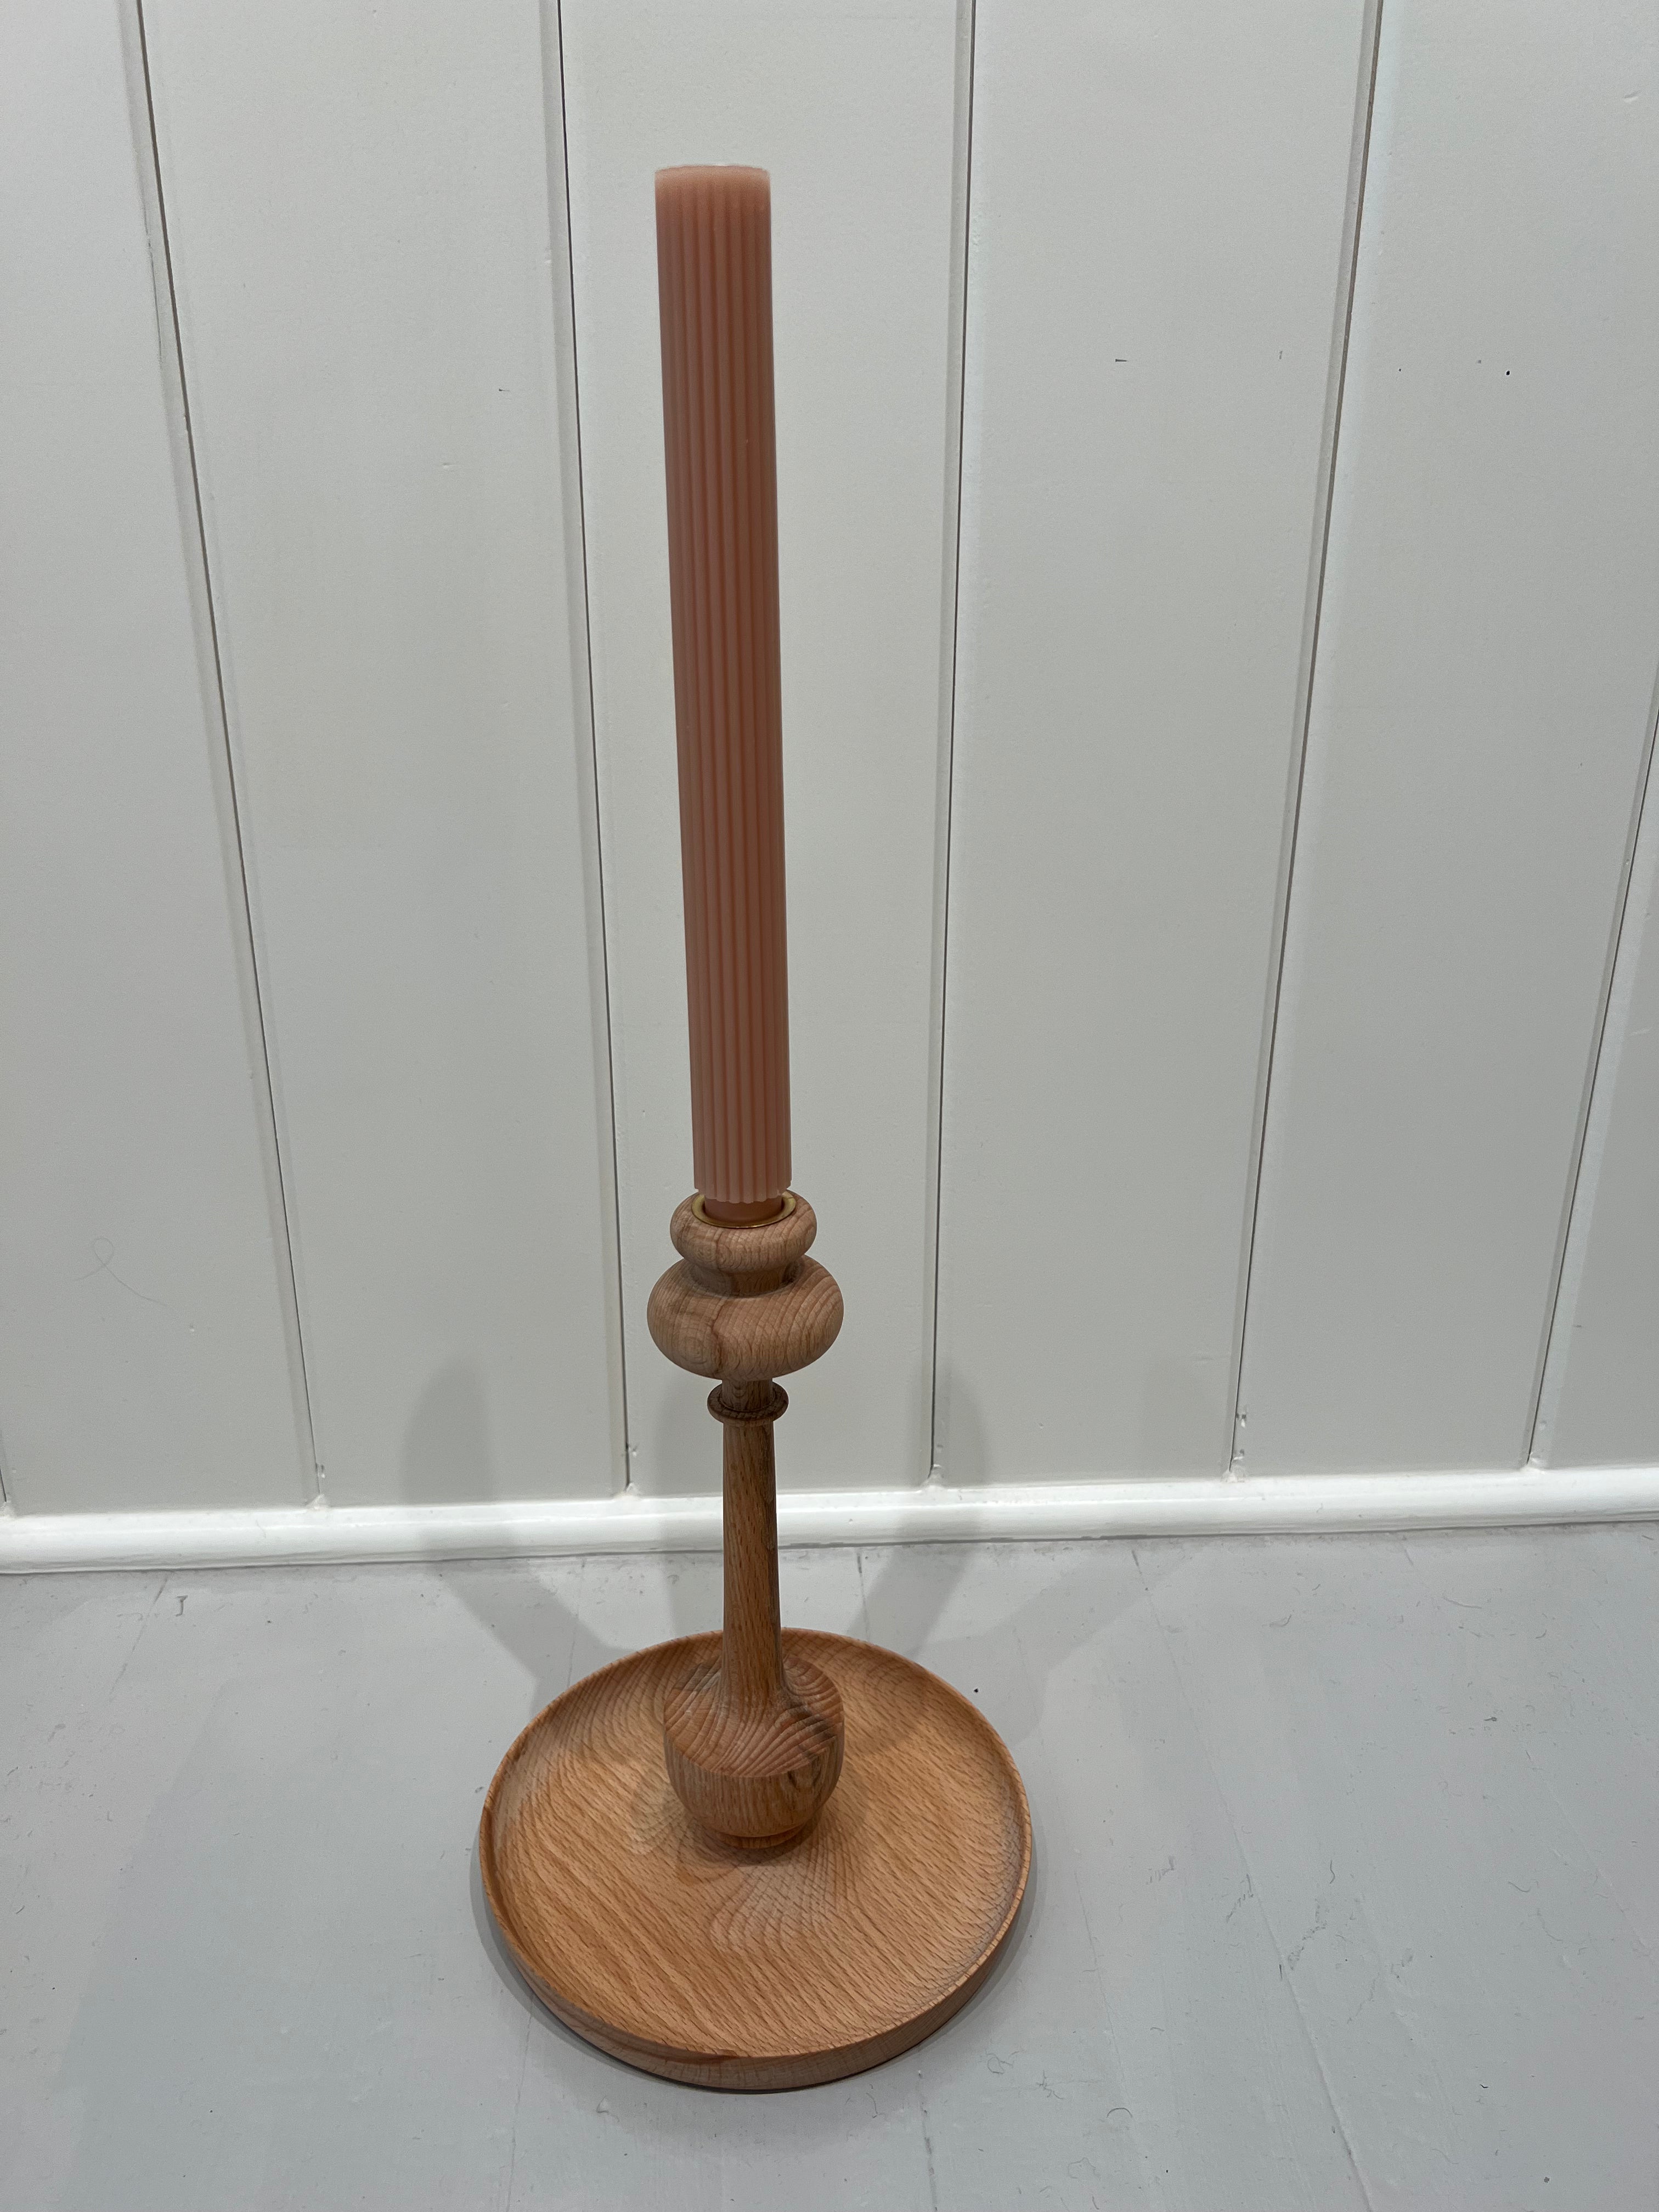 Candlestick Holder with Tray - Beechwood